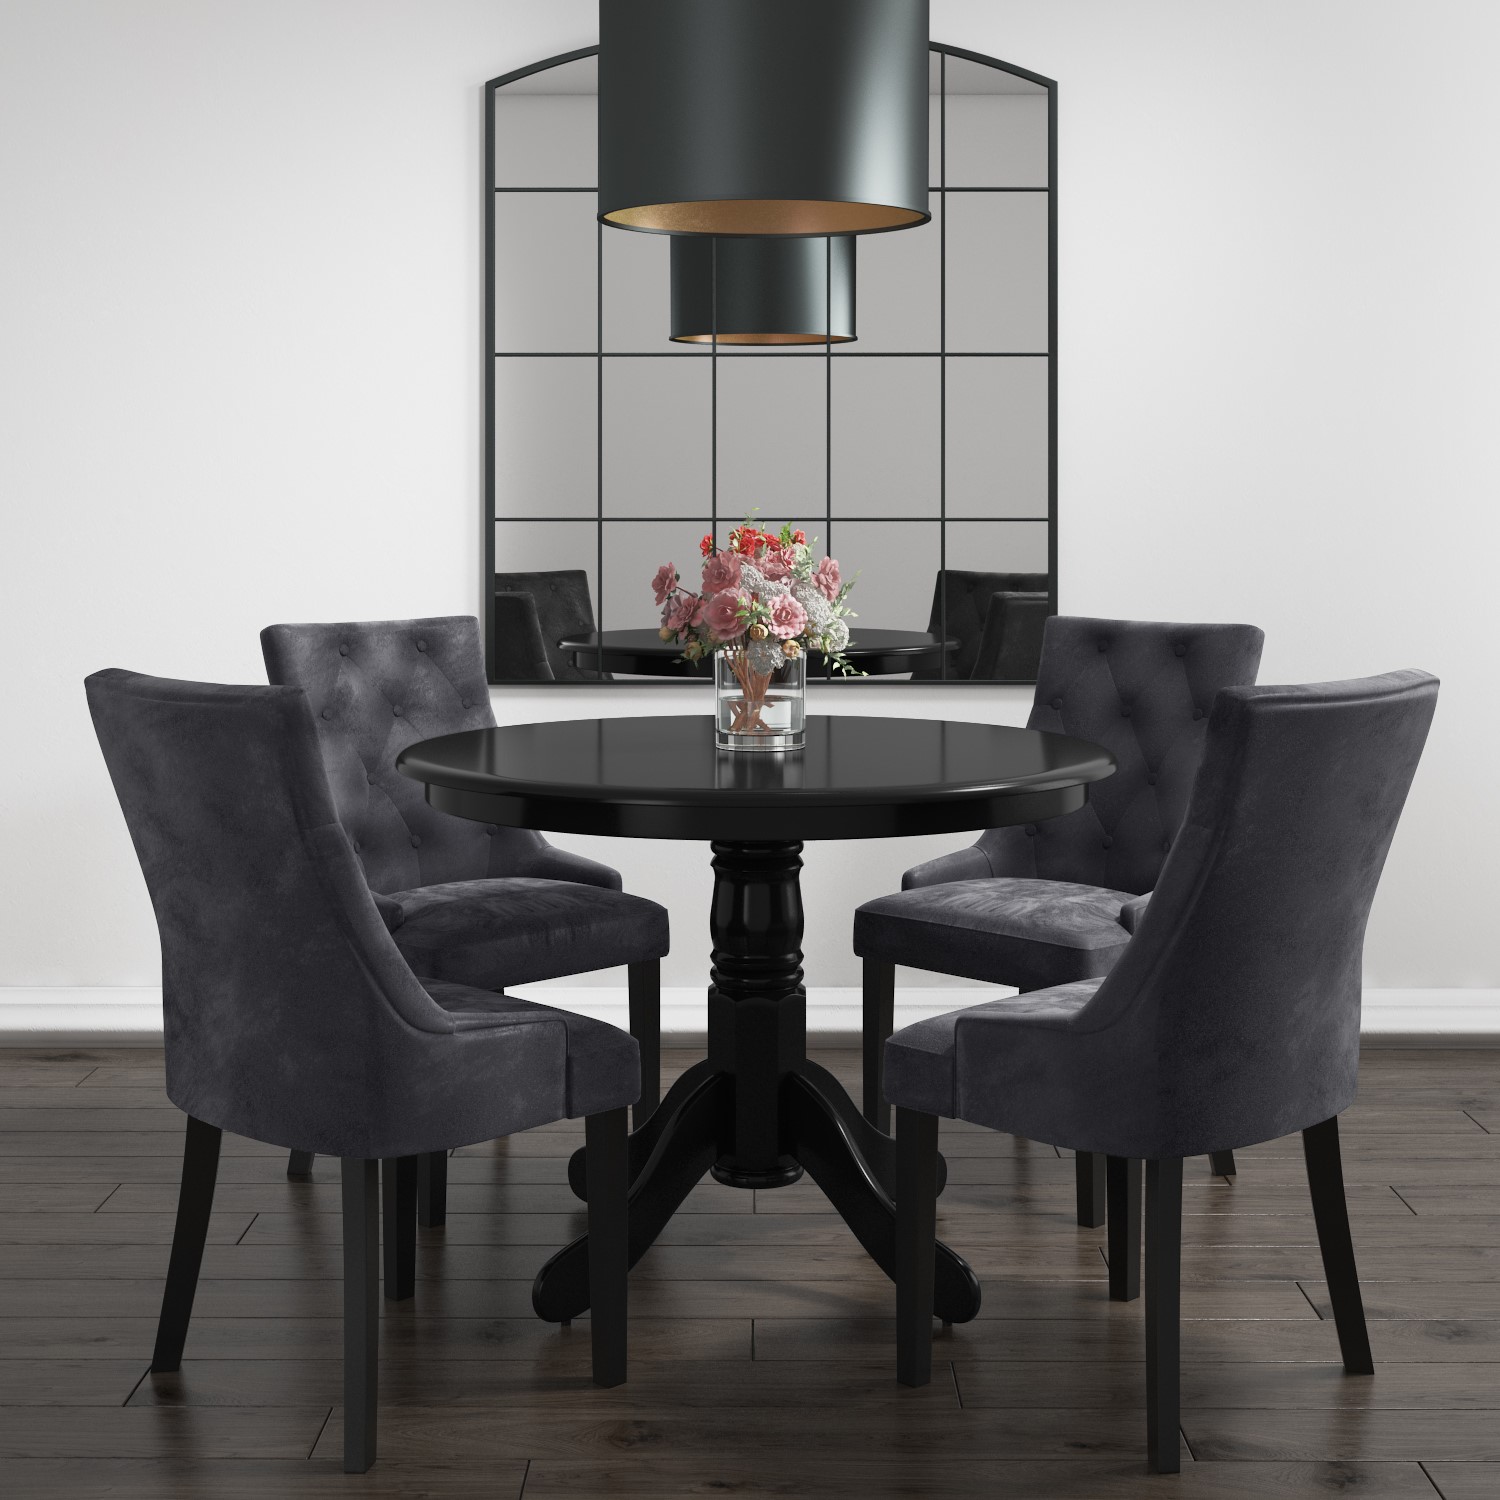 Small Round Dining Table In Black With, Small Round Kitchen Table Chairs